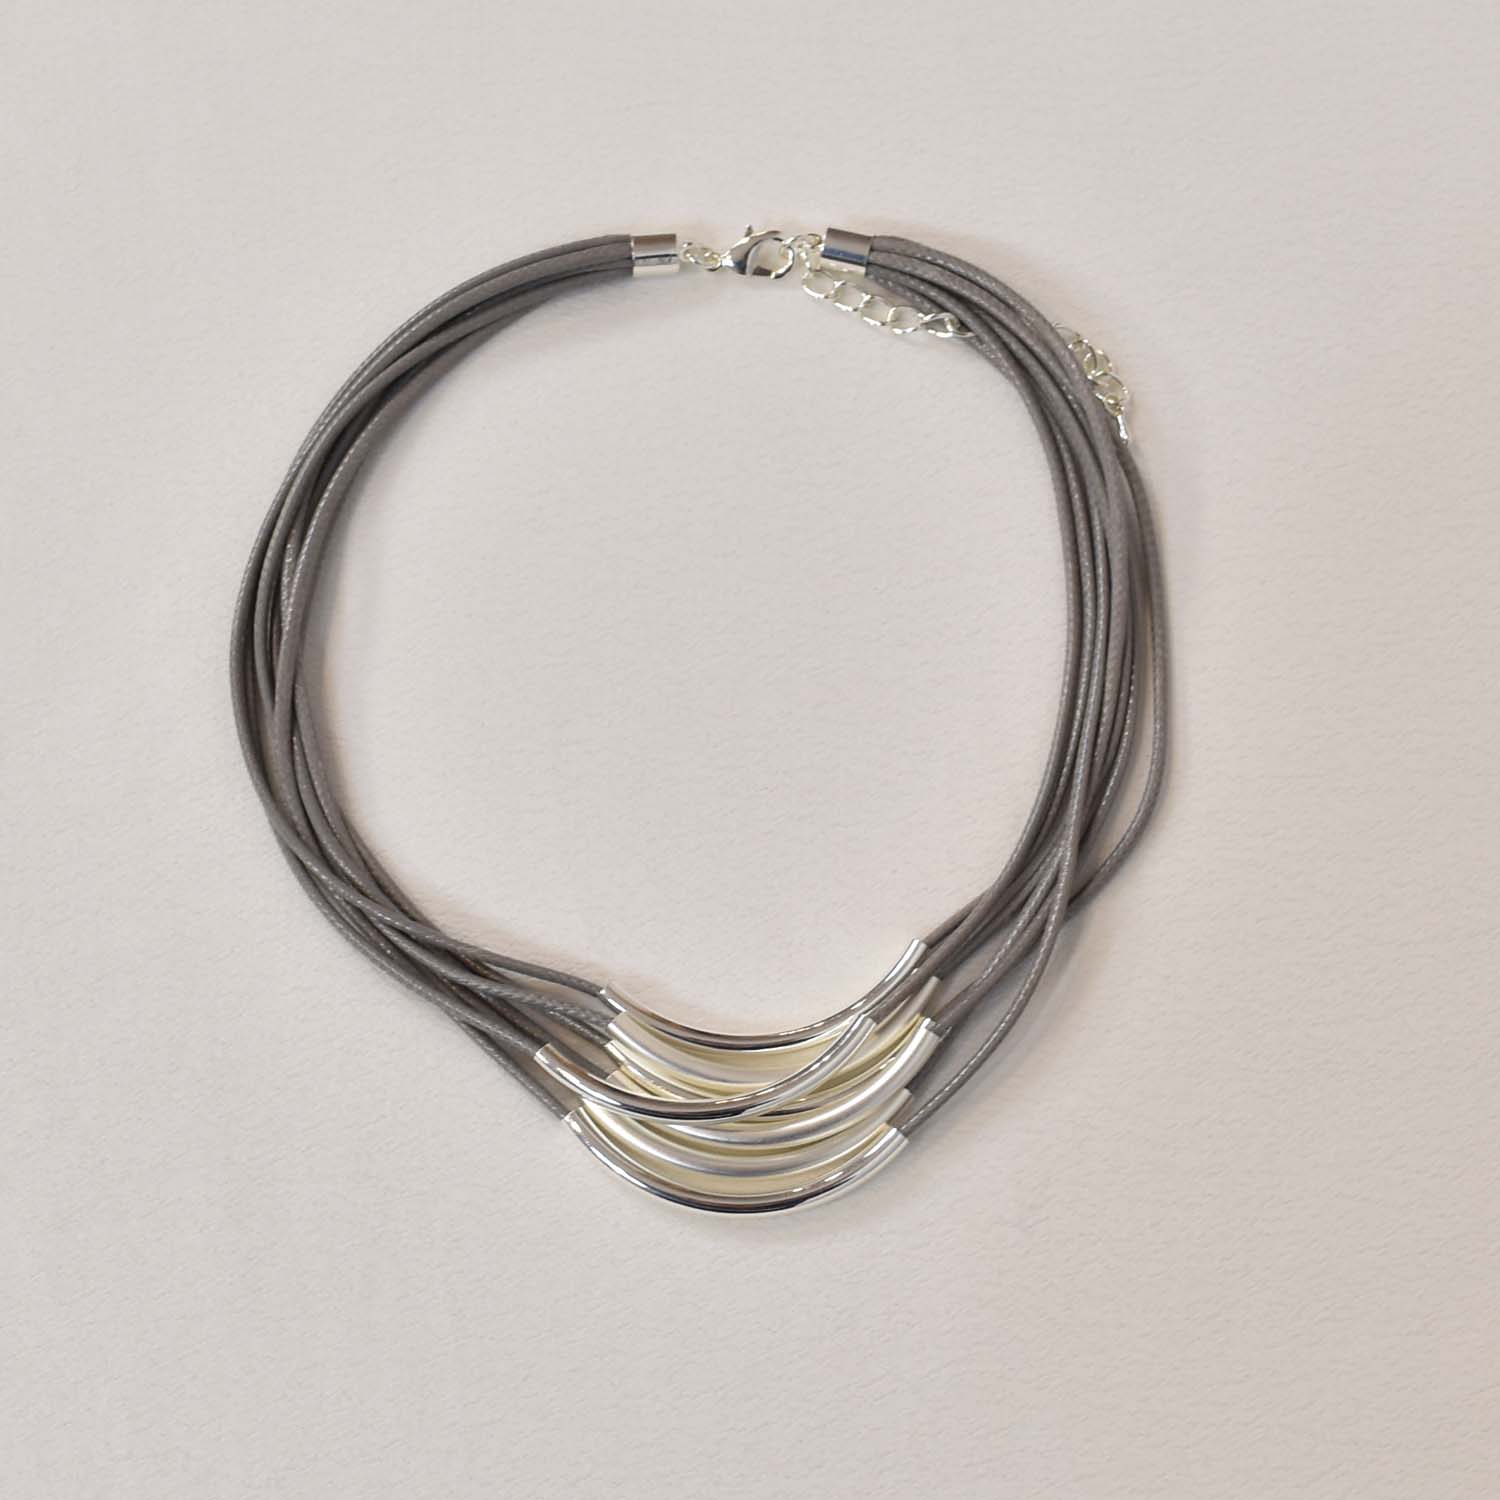 Gray waxed strings necklace